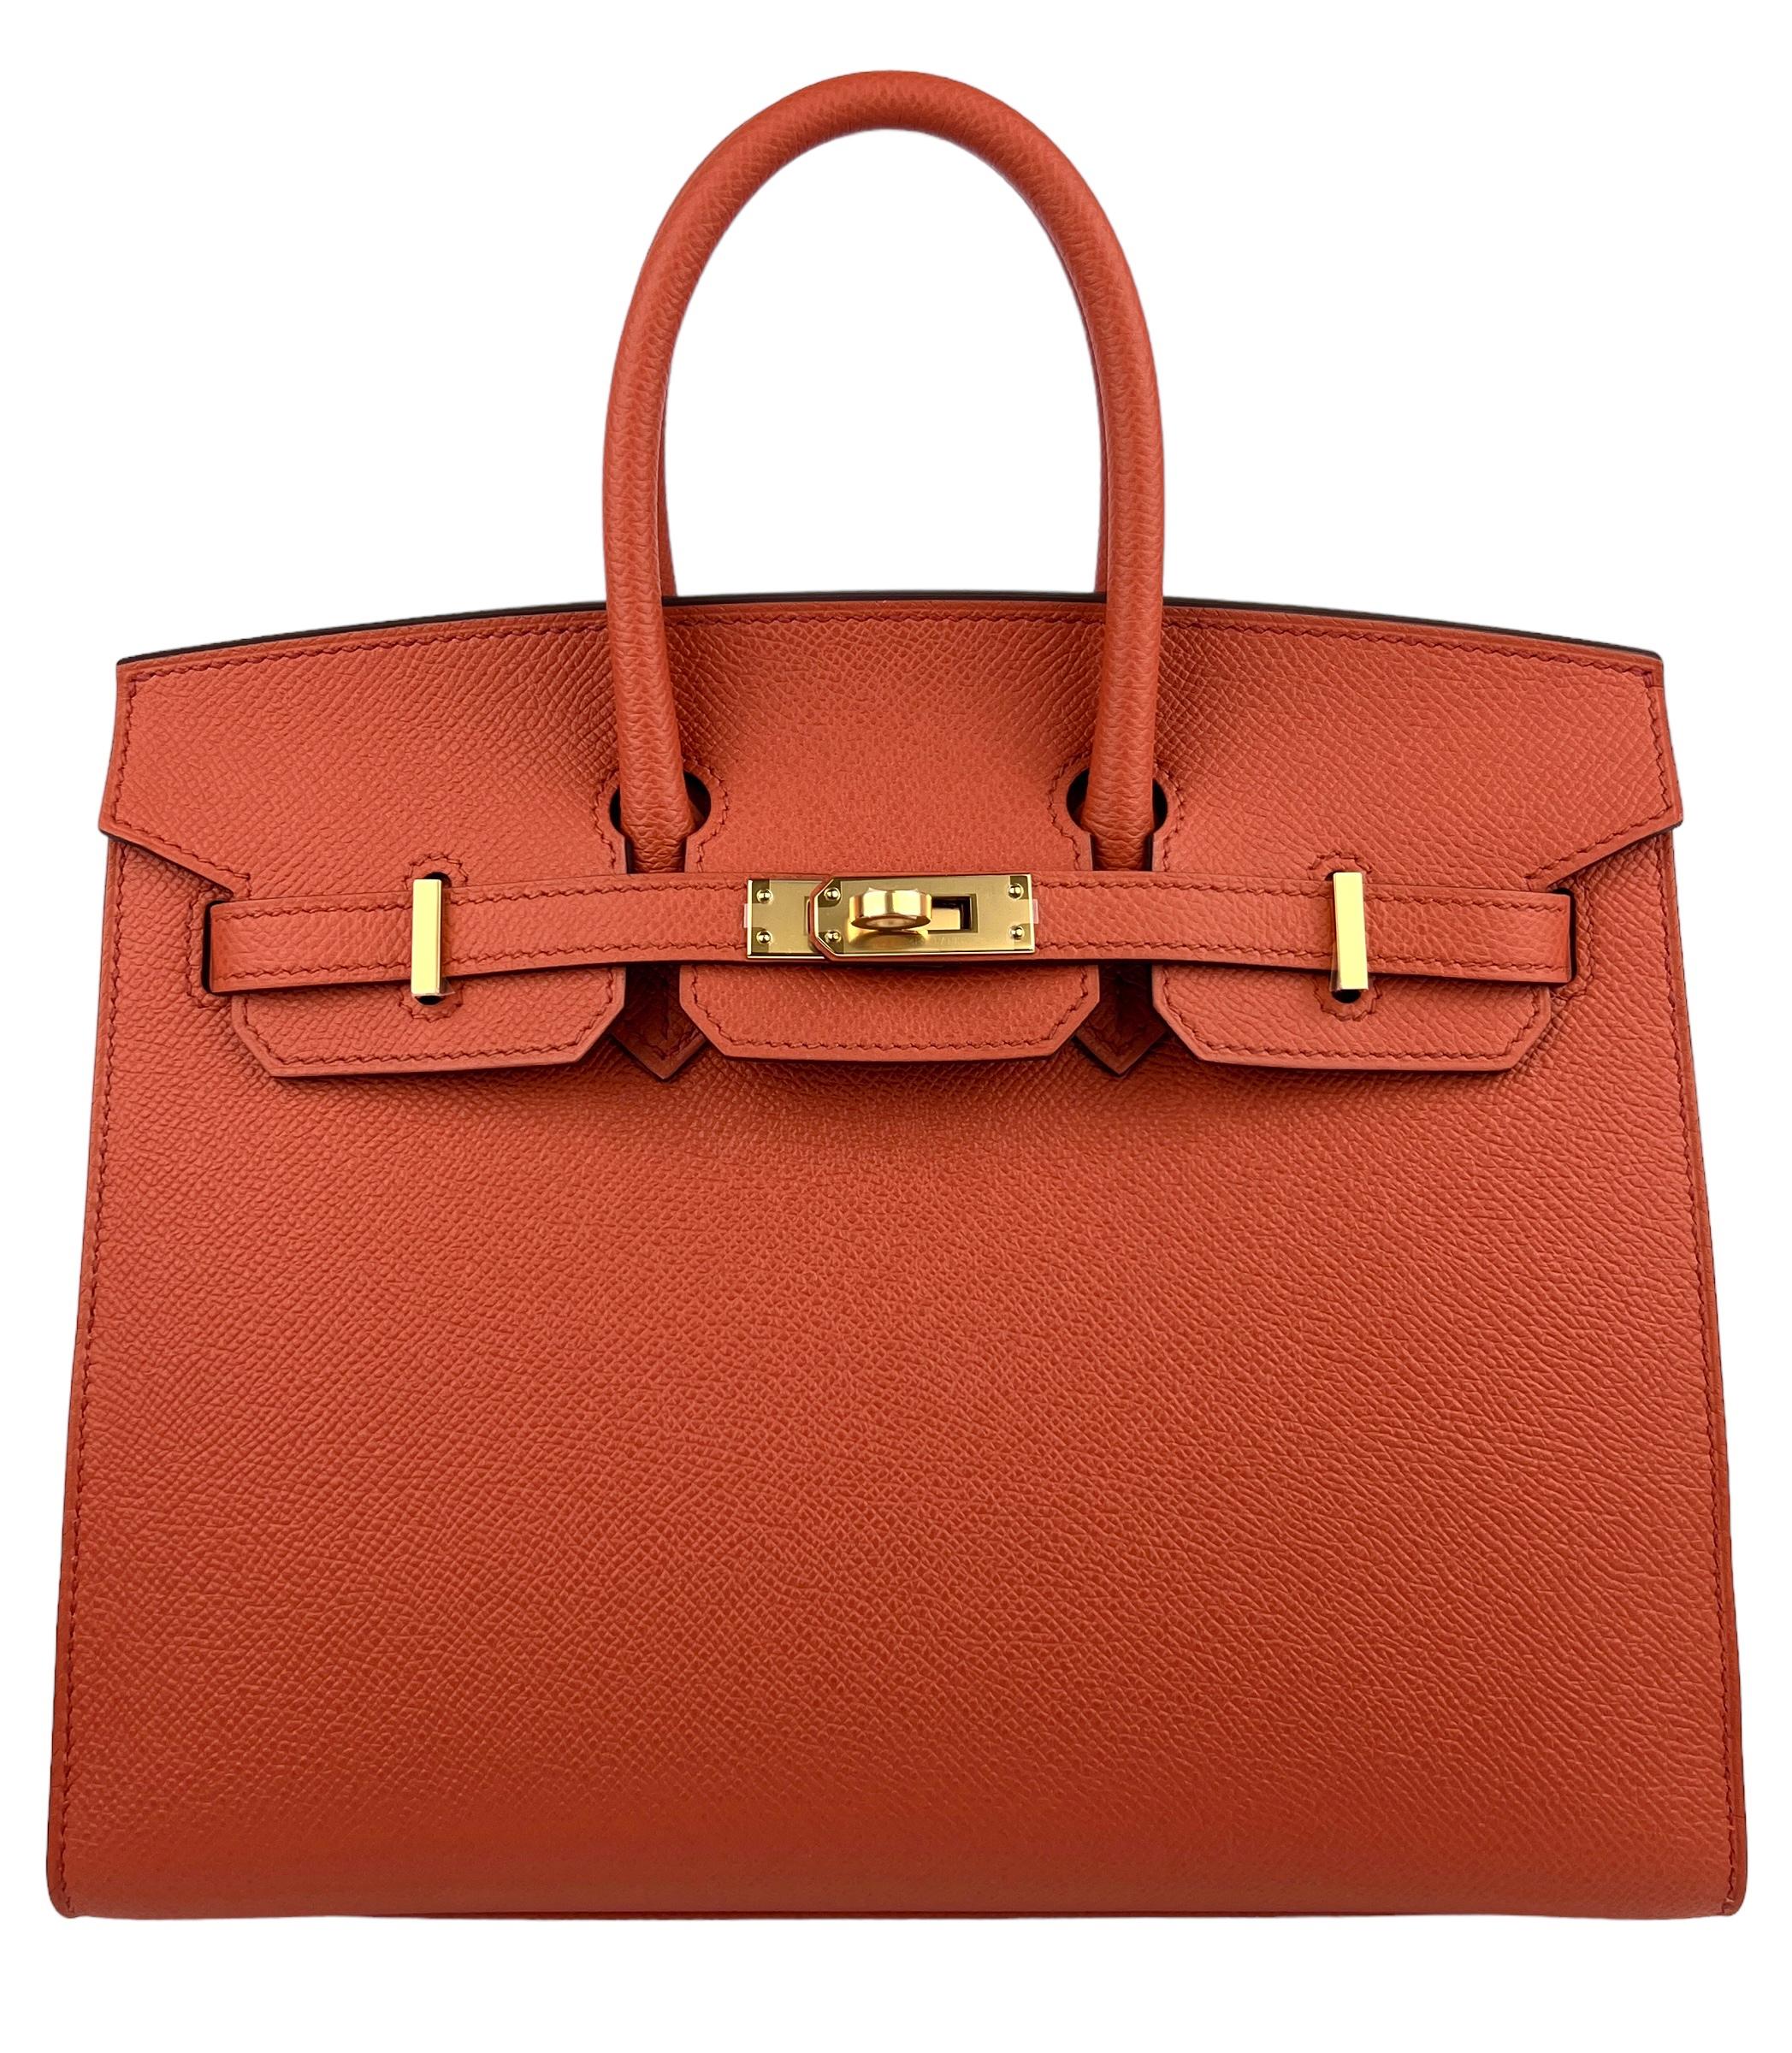 As New Ultra Rare Stunning Hermès Birkin 25 Sellier Epsom Leather Terre Battue Gold Hardware. Y Stamp 2020. 

Includes all accessories and Box. 

Shop with Confidence from Lux Addicts. Authenticity Guaranteed! 
